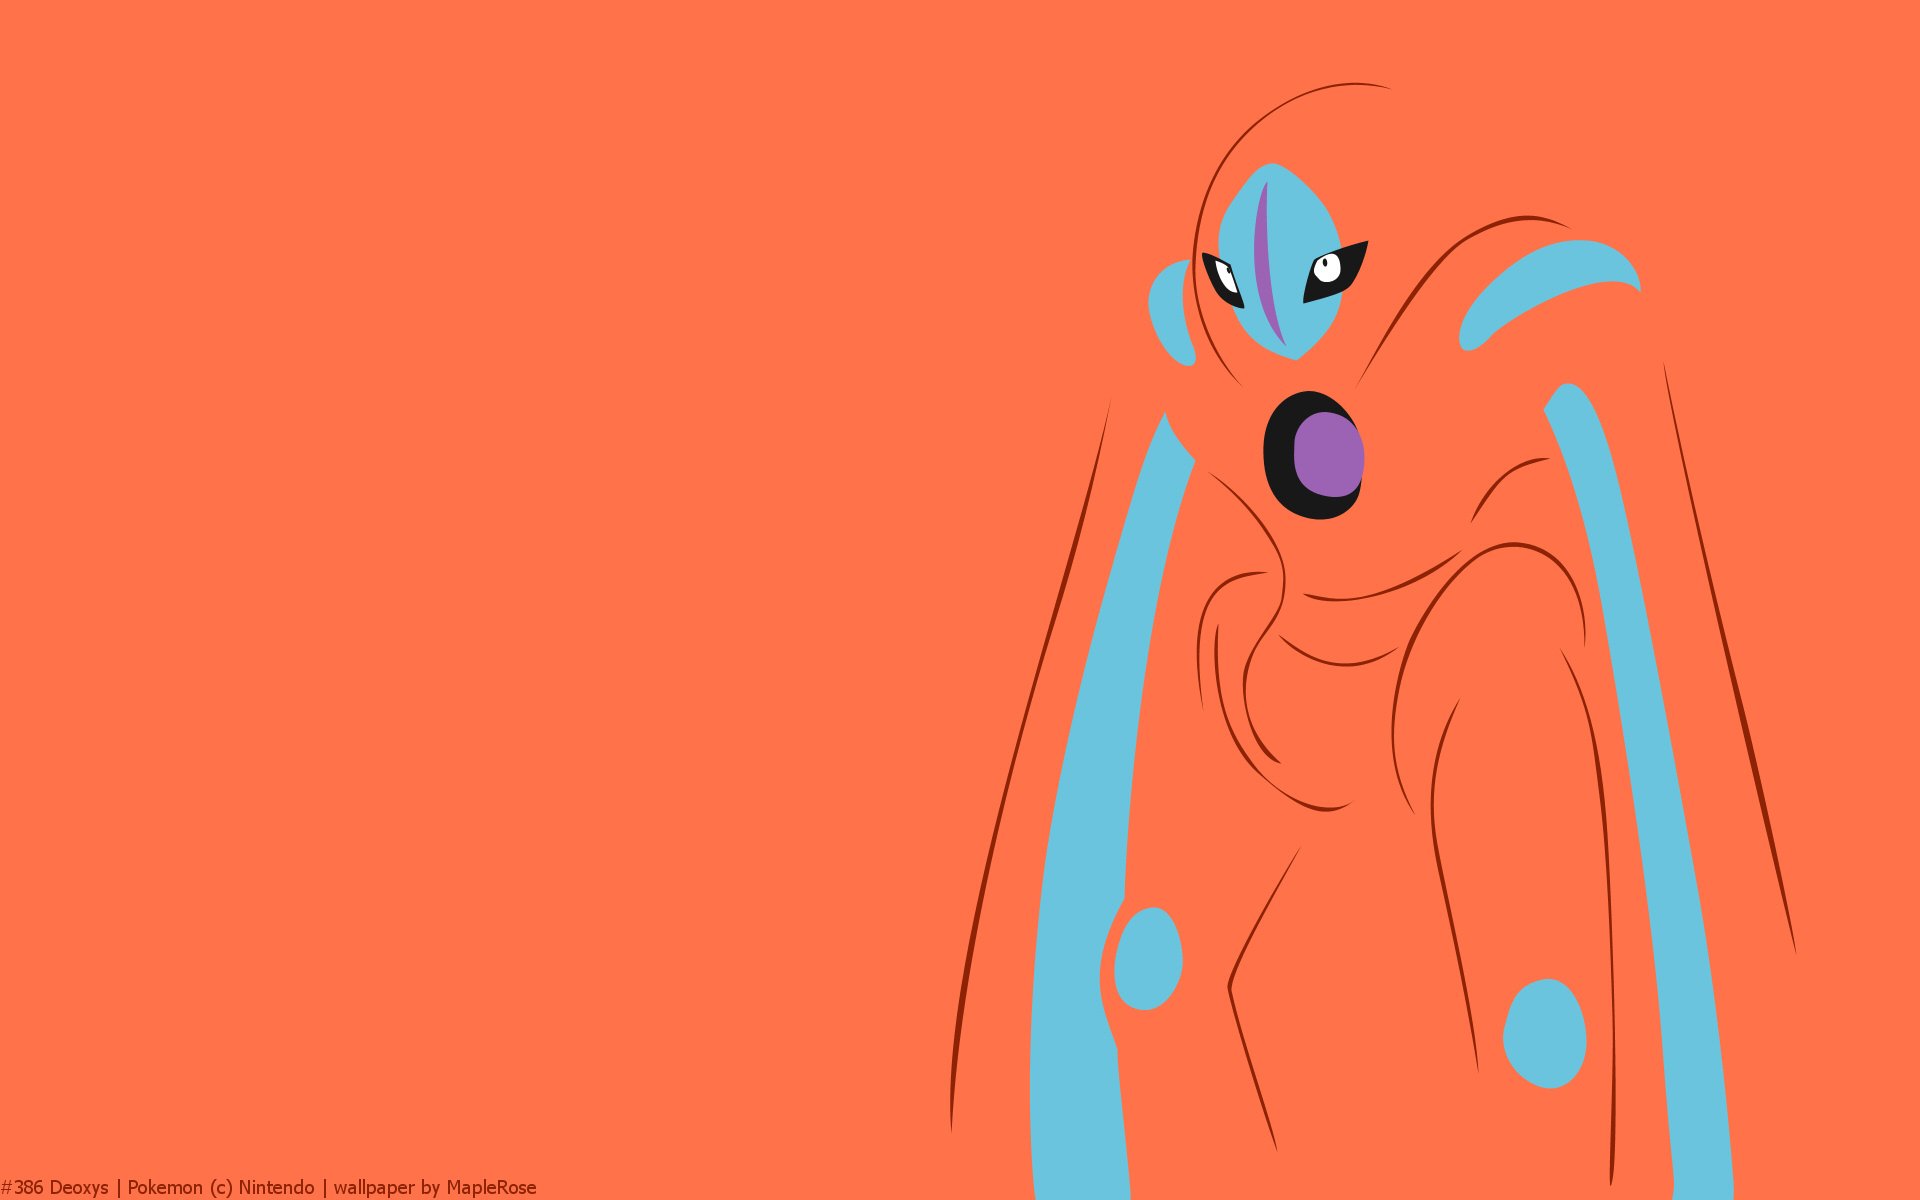 Deoxys - Defense (Pokémon GO) - Best Movesets, Counters, Evolutions and CP